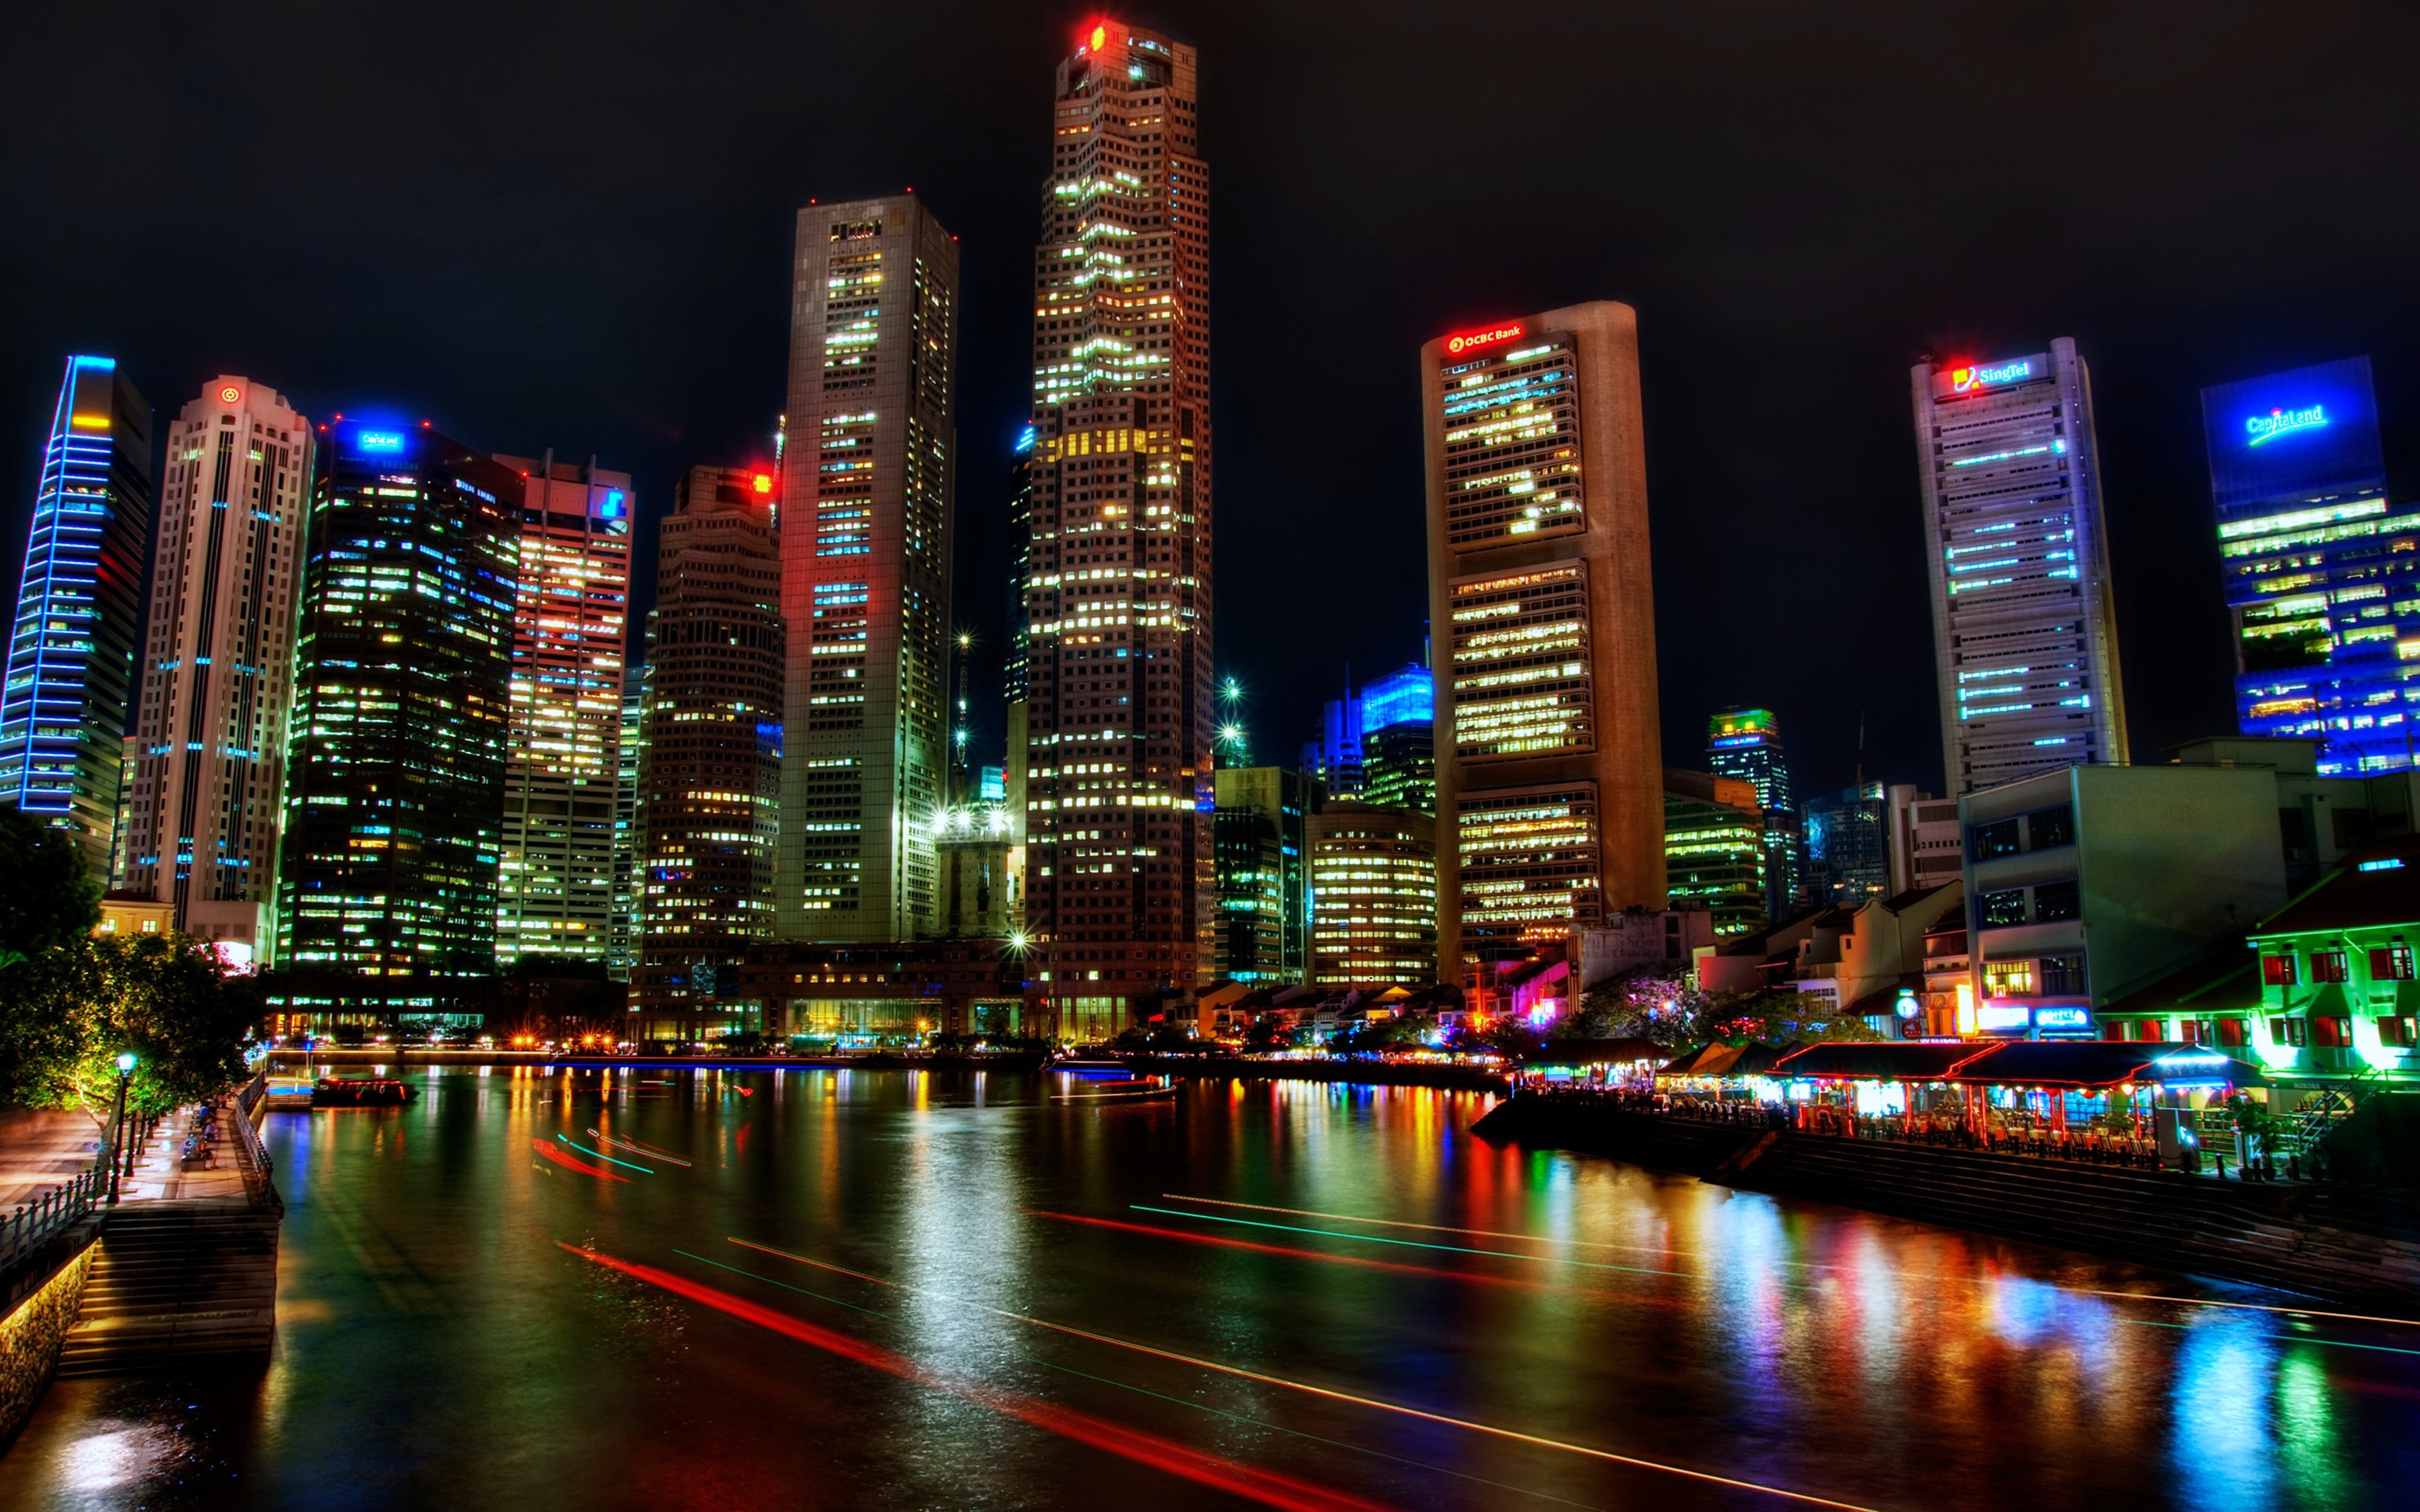 singapore, Houses, Rivers, Skyscrapers, Night, Colors, Lights, Road, City Wallpaper